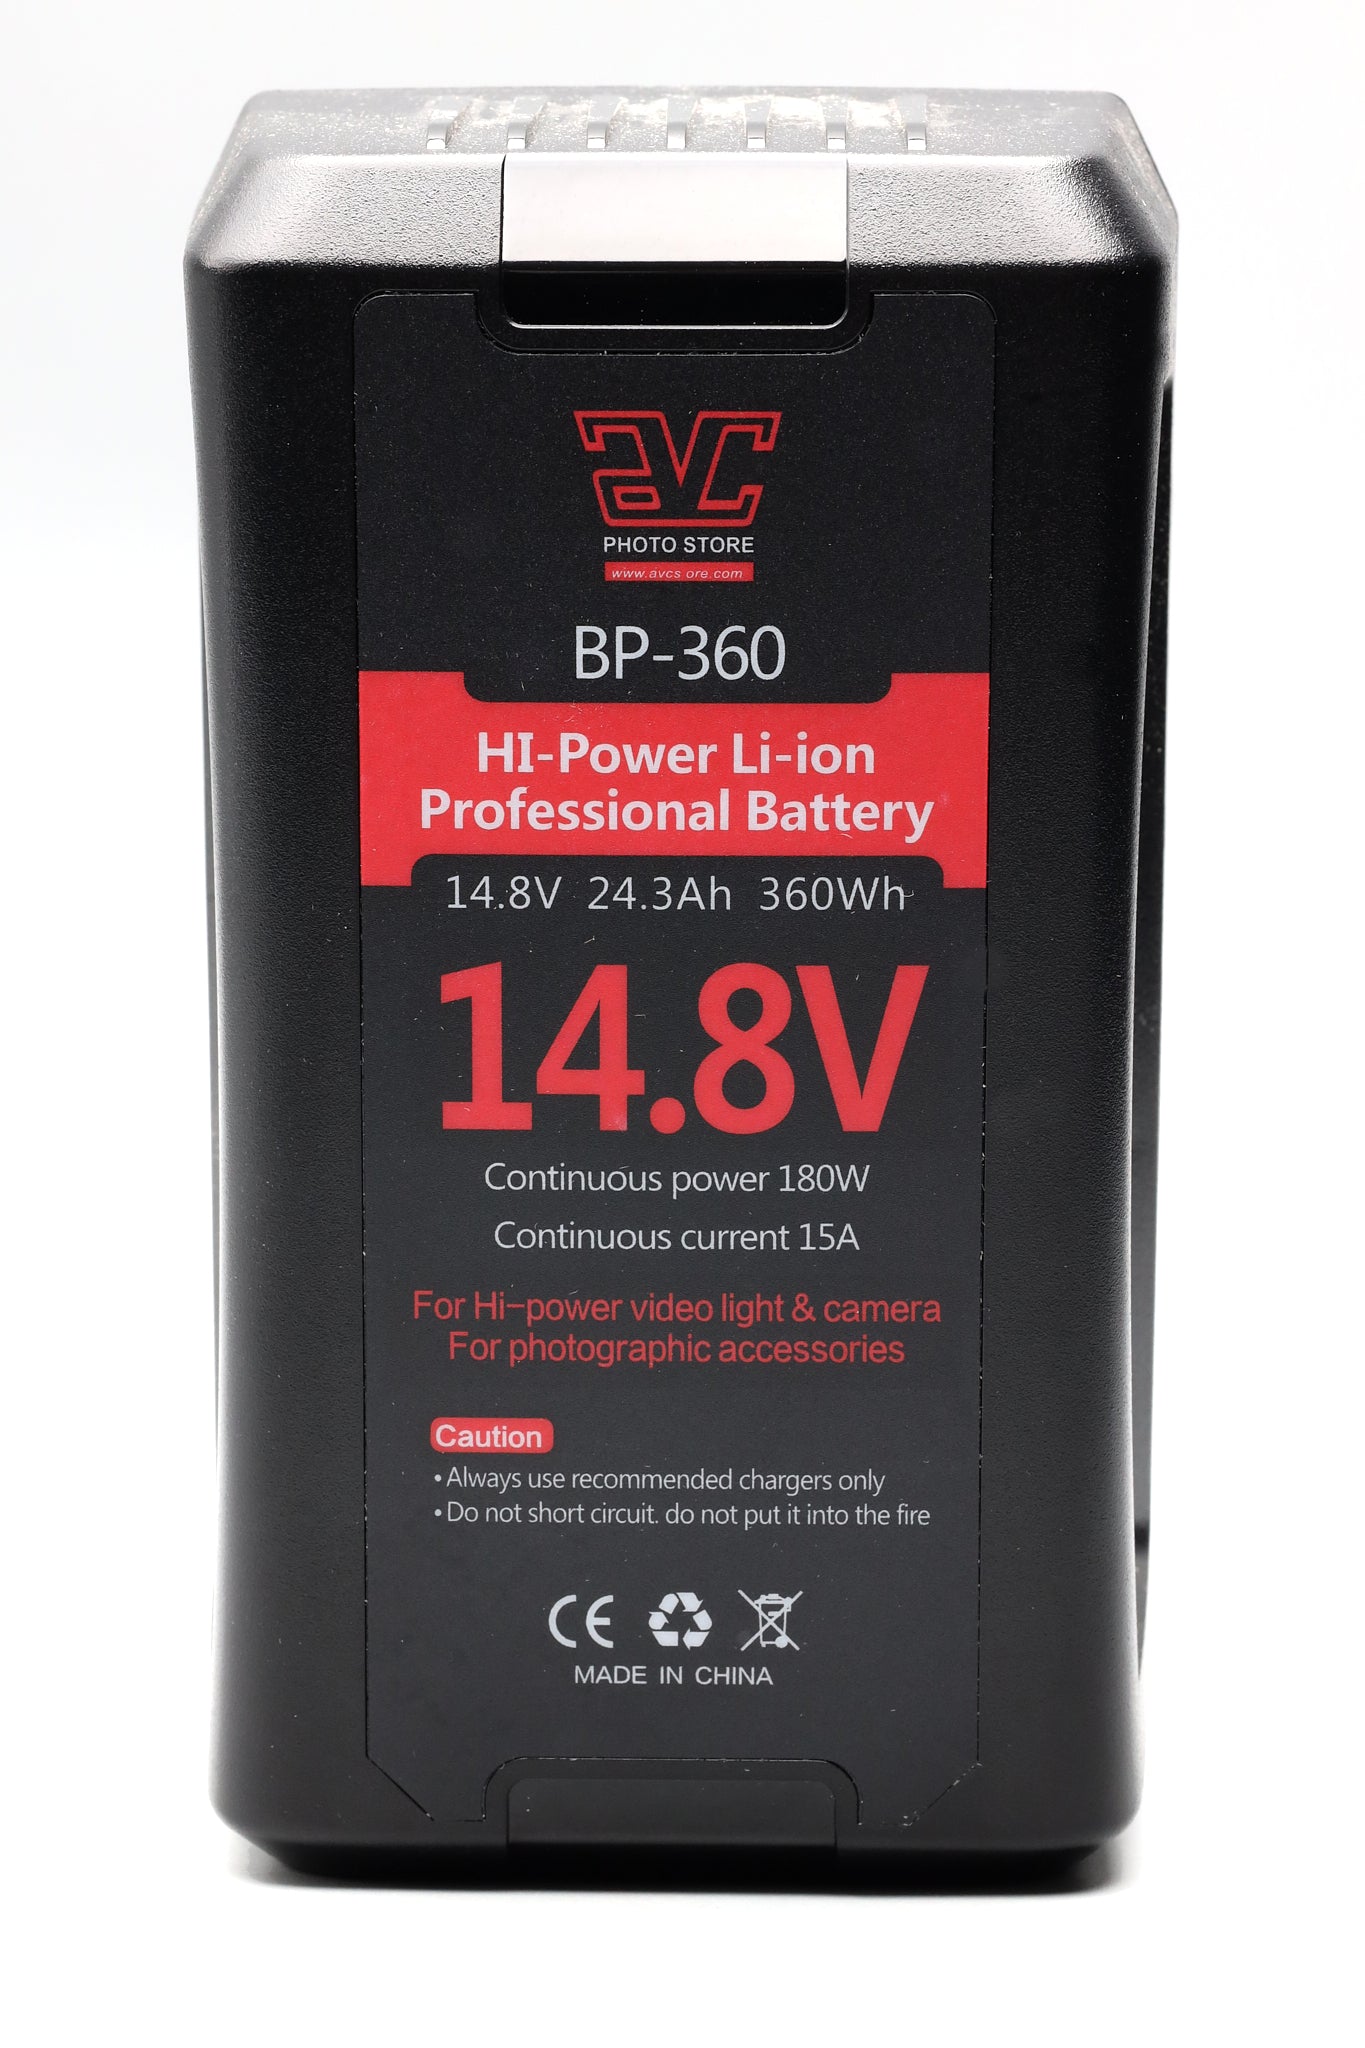 AVC BP360 Lithium Ion Professional Battery, 14.8V 24.3Ah 360Wh.